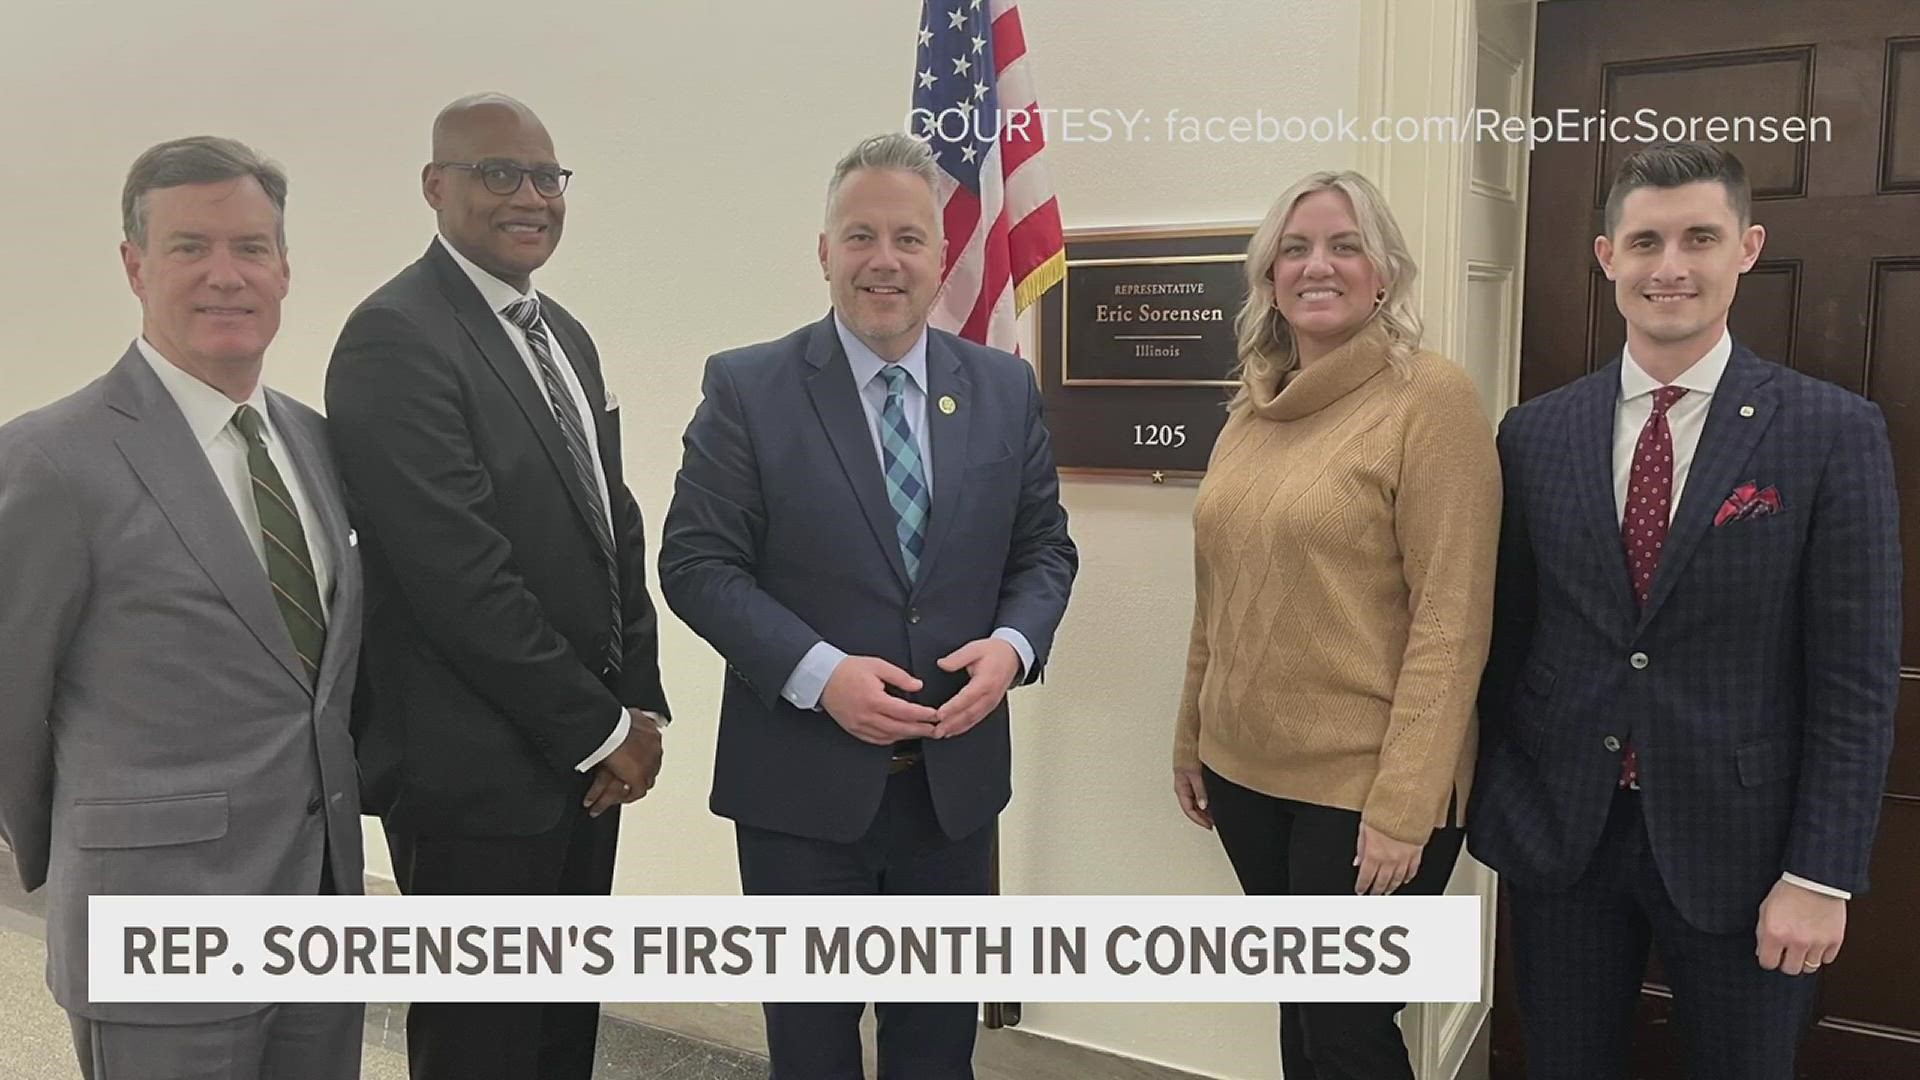 Sorensen paid a visit to the News 8 studio to share what he's been doing in his first month in office.